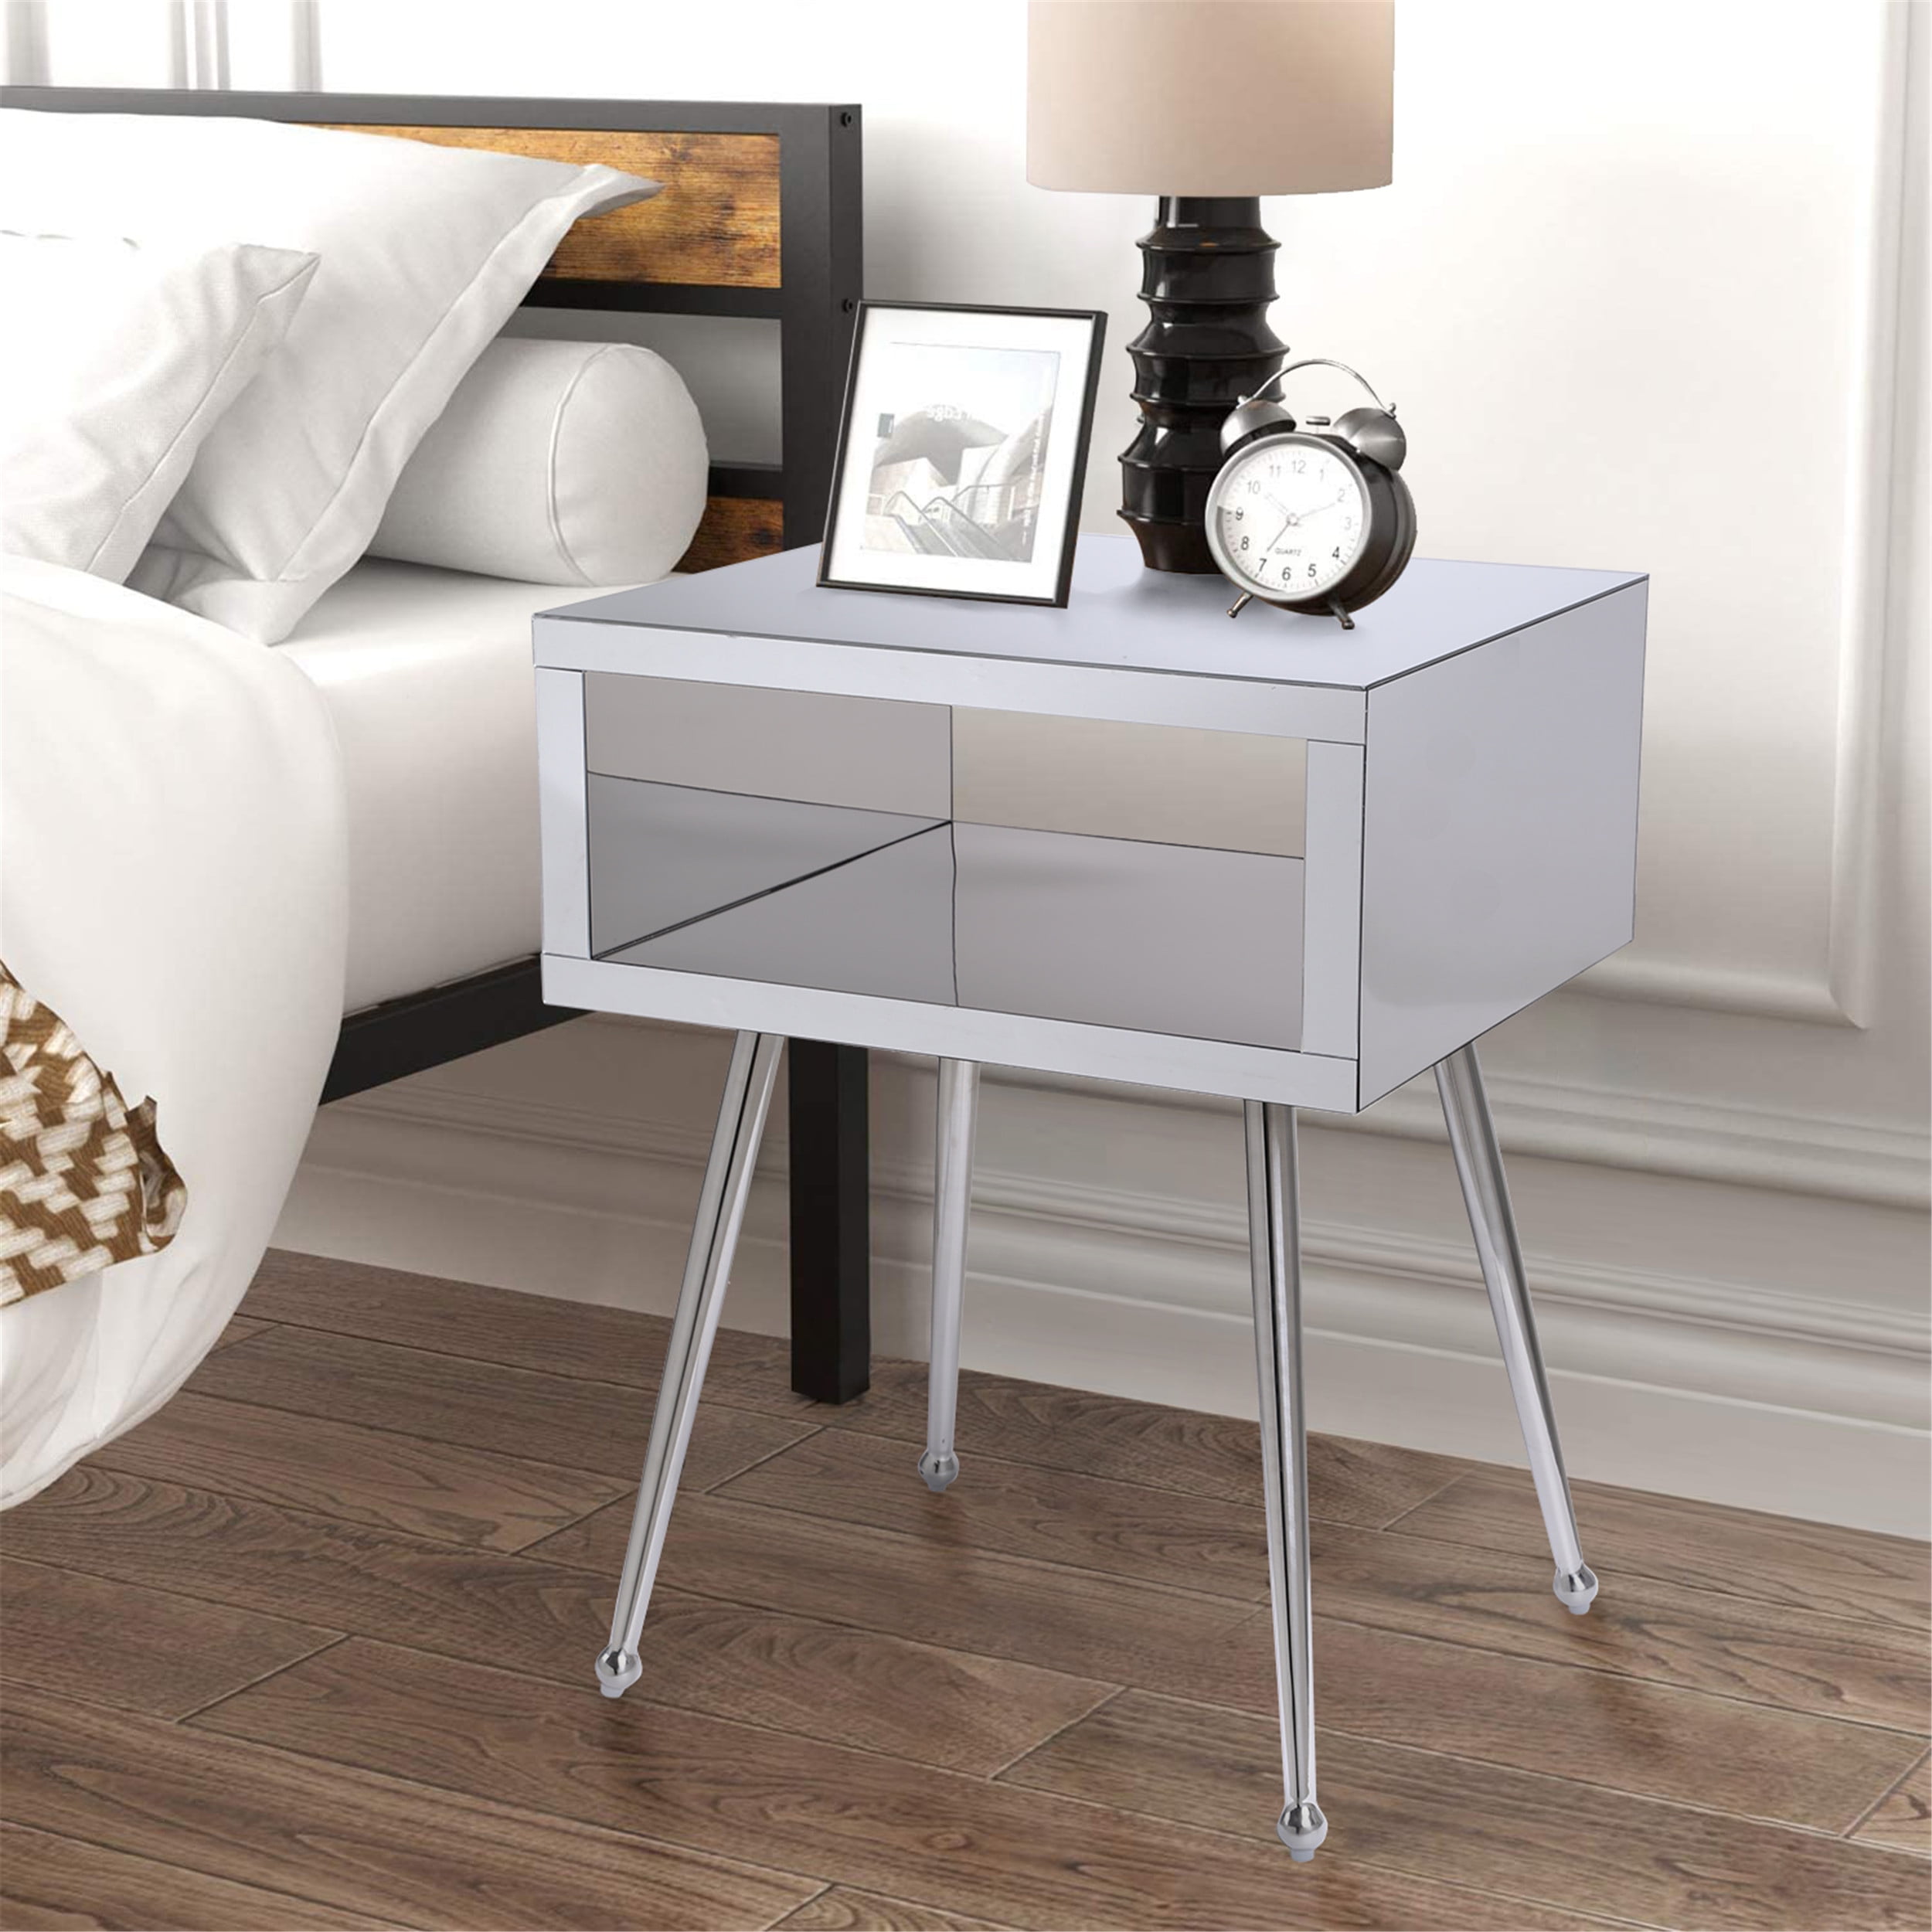 Promotion Mirror Side Table End, Narrow Mirrored End Table